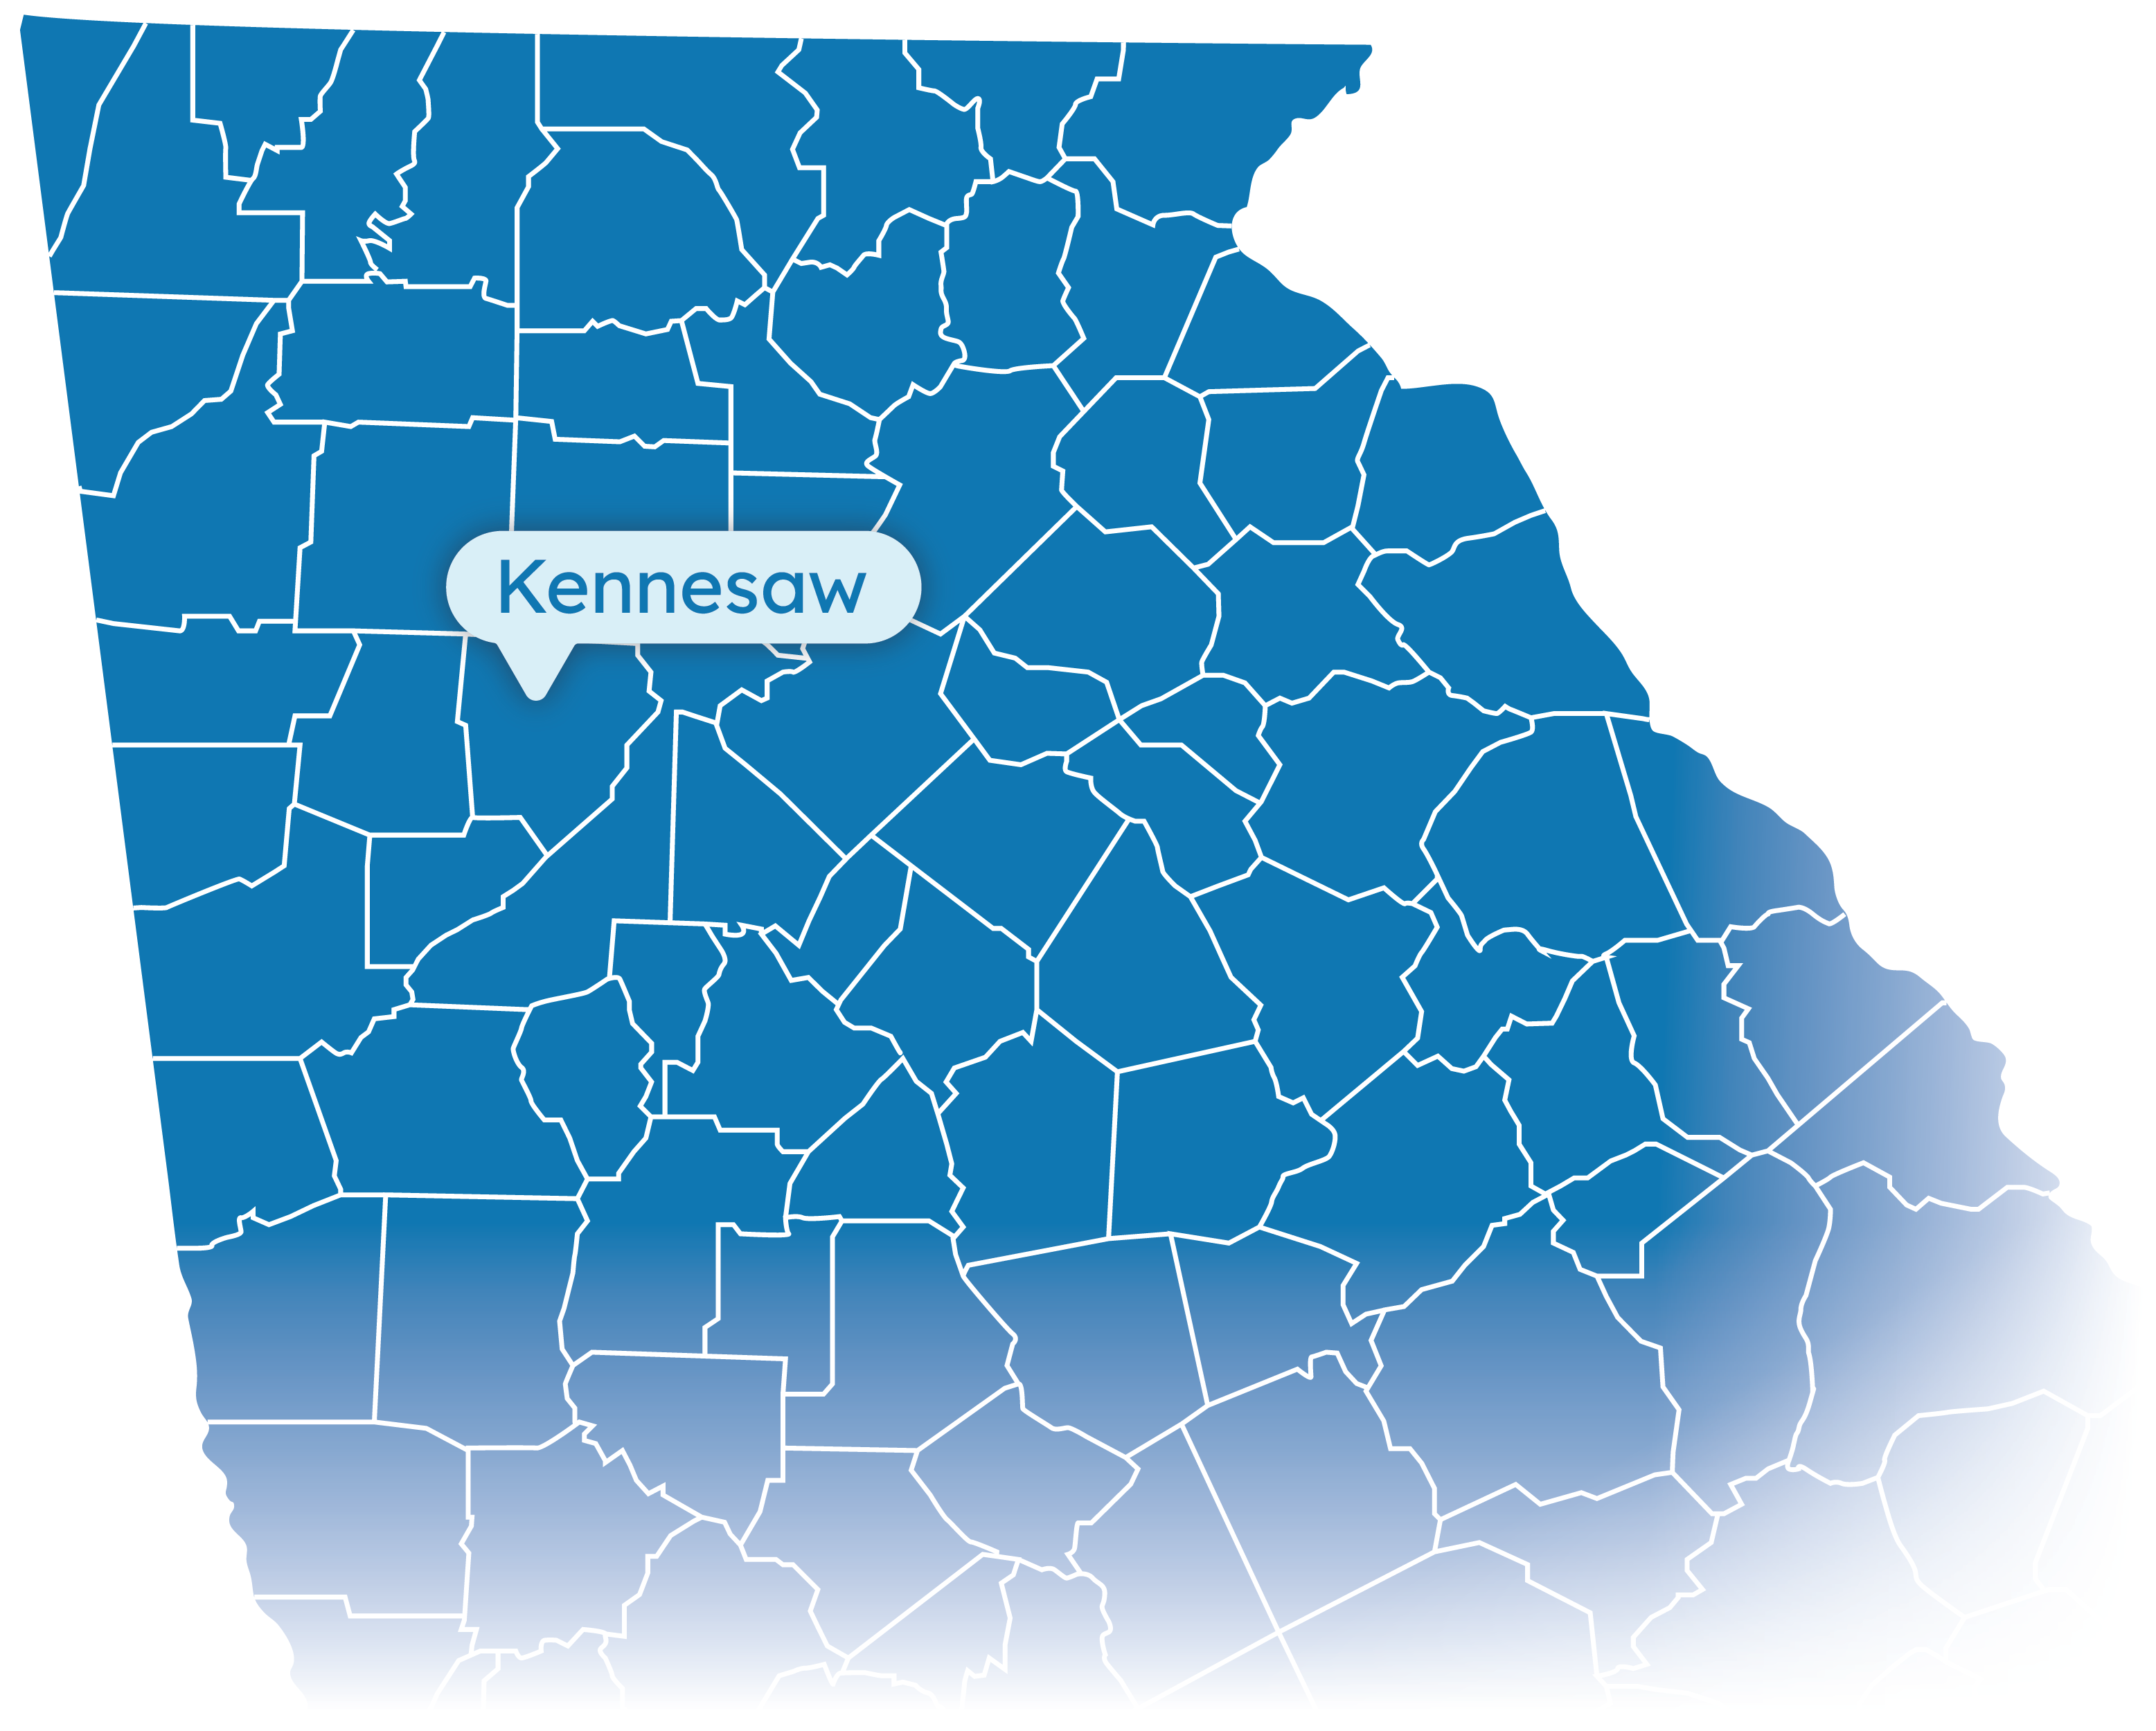 Map of Georgia with Kennesaw highlighted